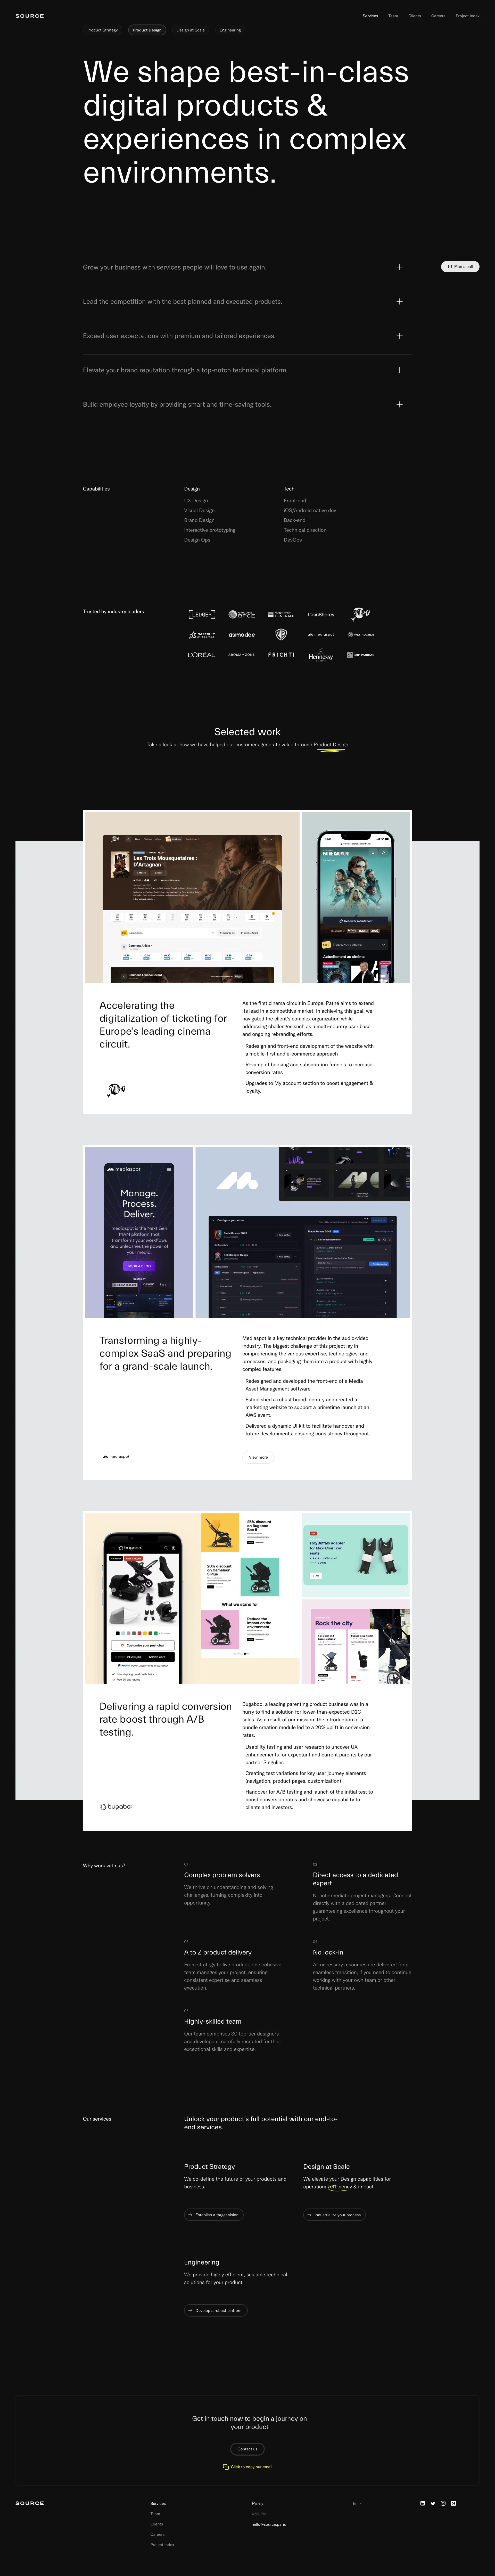 Source Landing Page Example: Source is a group of designers & technologists on a mission to make Corporate and Startups more capable through state of the art digital solutions. We drive value in complex environments by leveraging Design & Engineering.